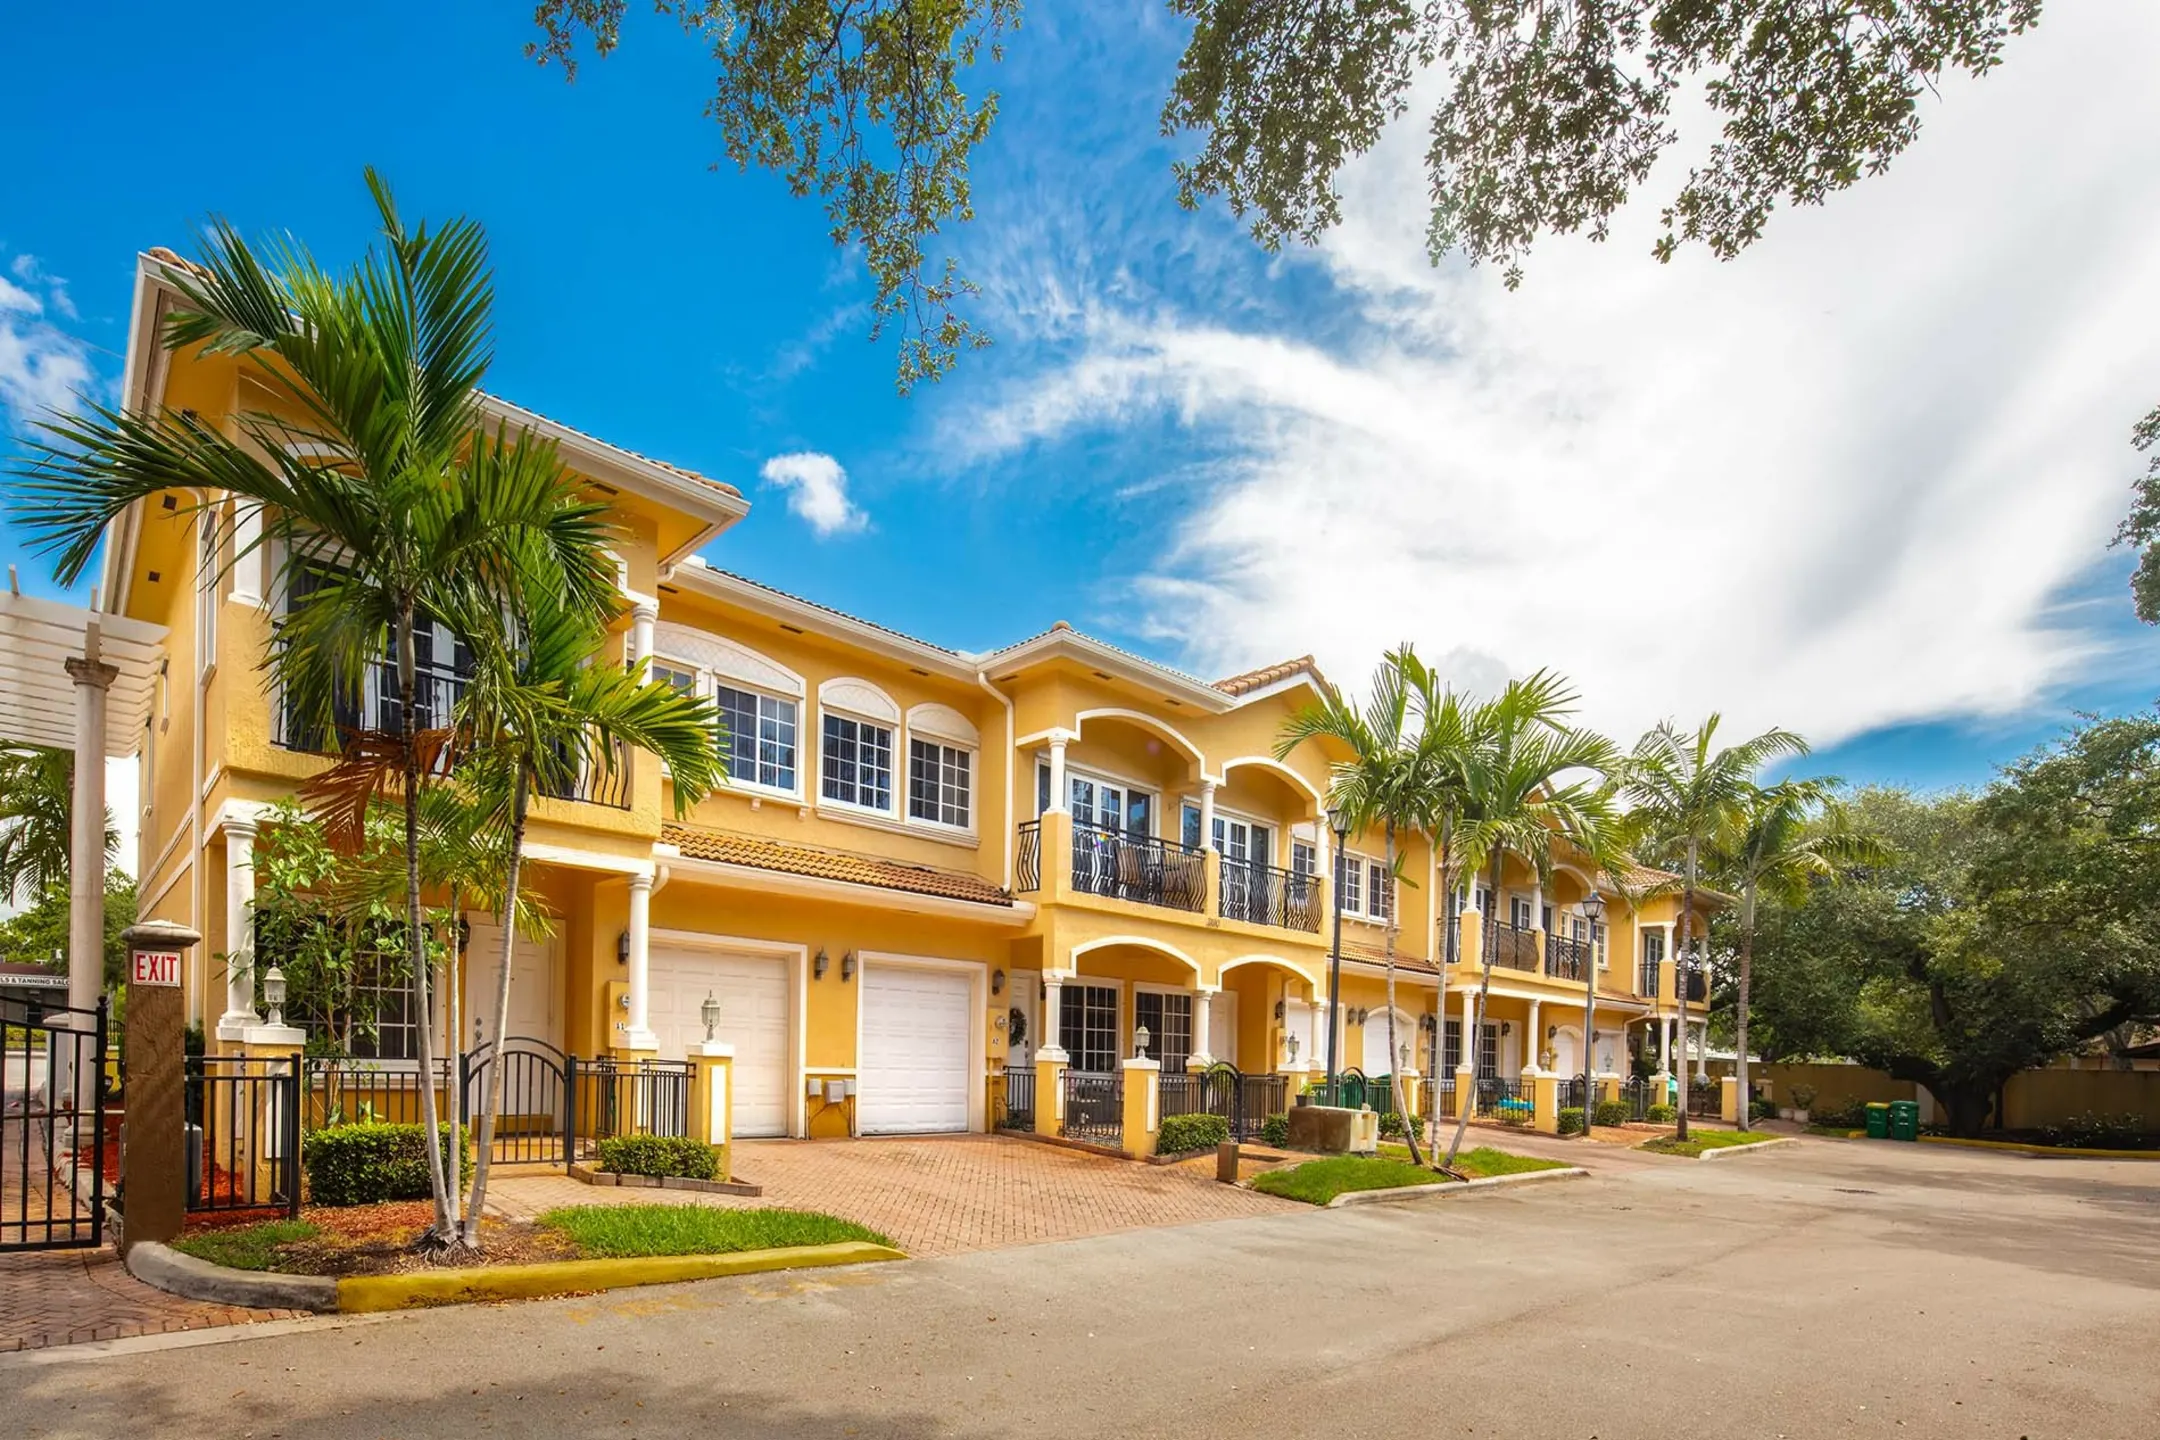 Building - Royal Oaks Townhomes - Hollywood, FL